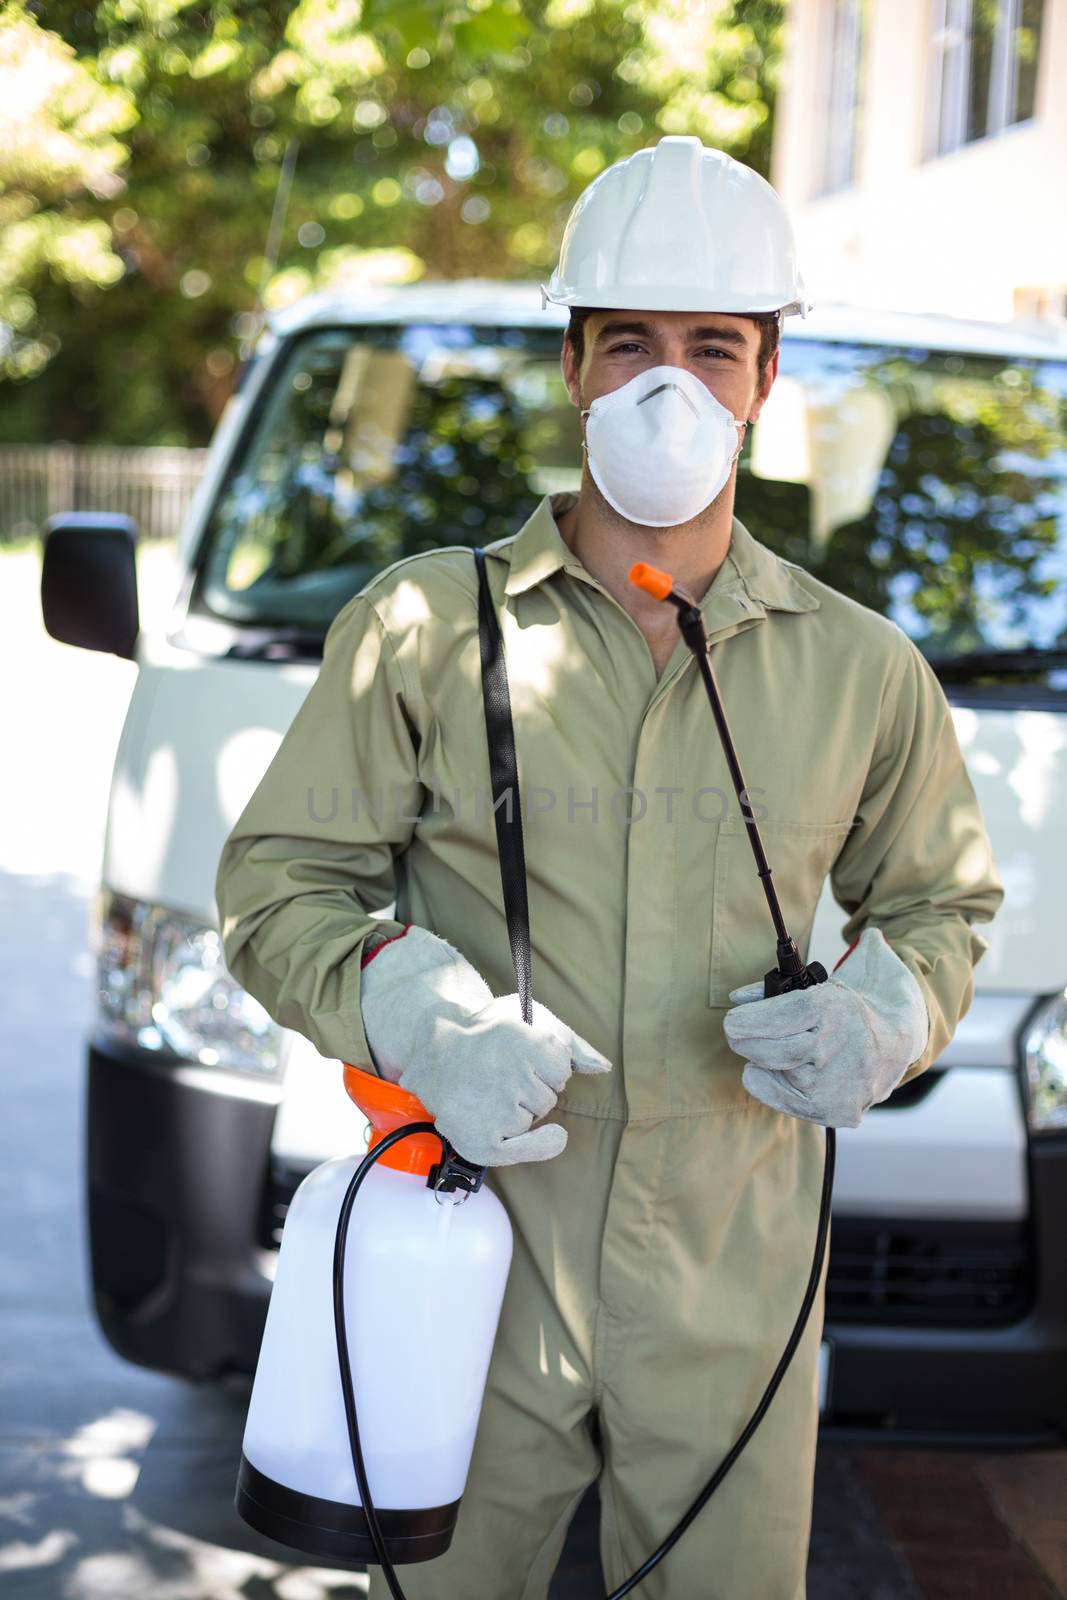 Portrait of worker with pesticide sprayer while standing by van